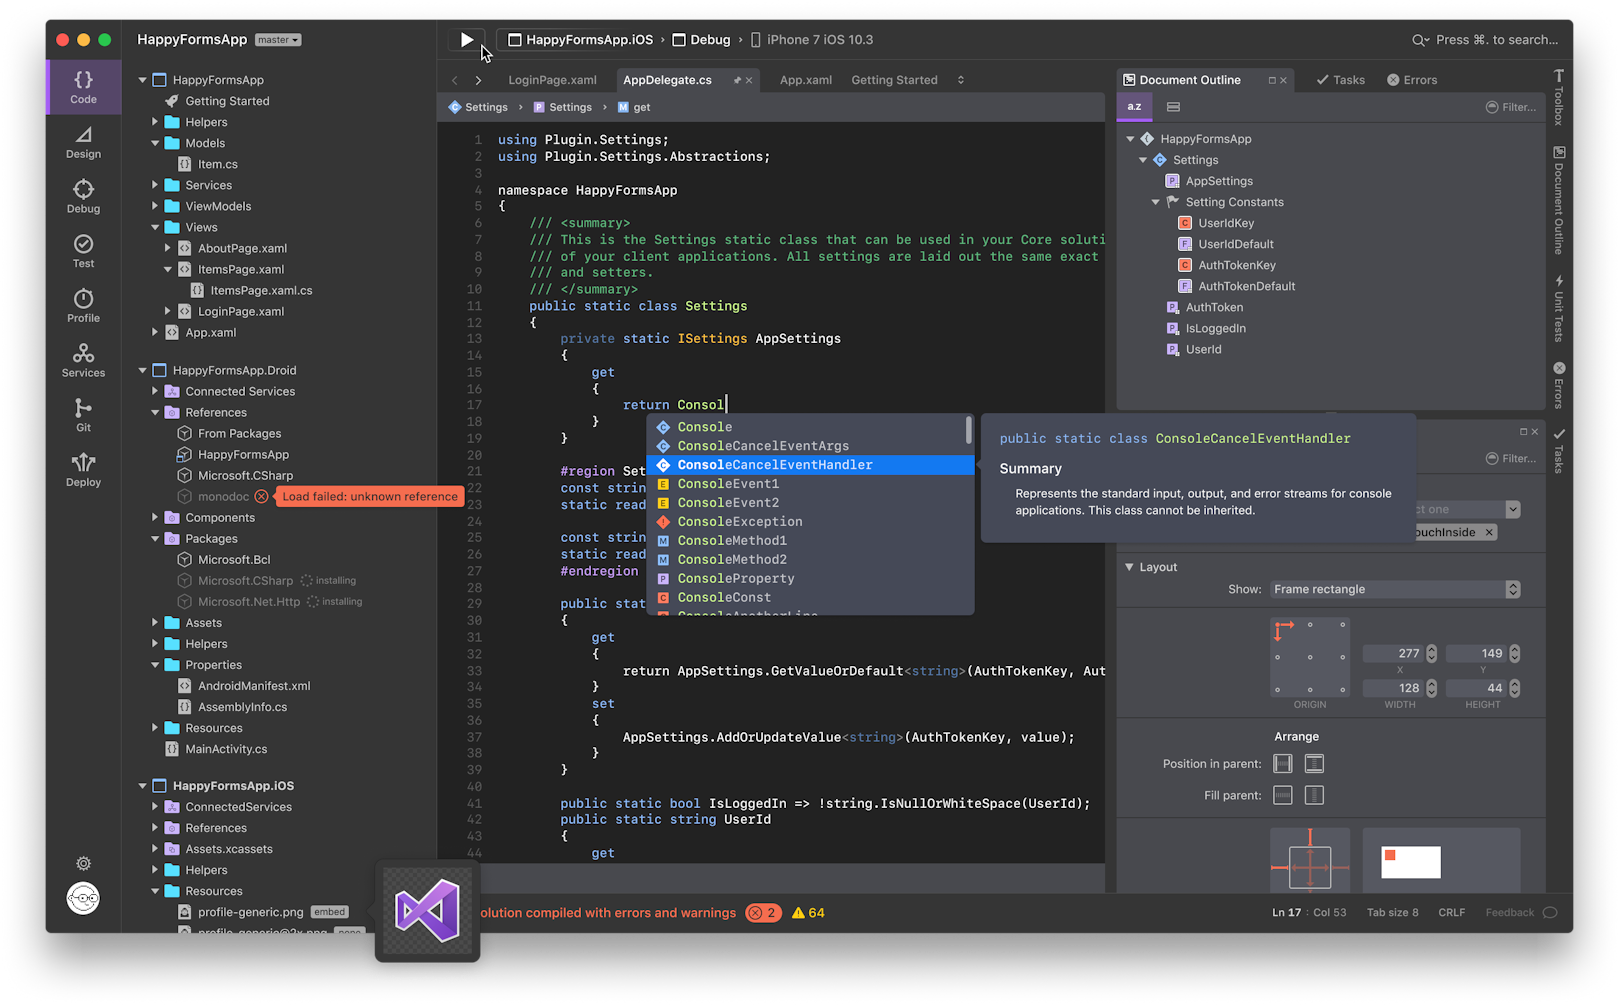 Screenshot of experimental Visual Studio for Mac configured for a mobile application development project named HappyFormsApp, with file structure on the left, Code Editor in the center showing C# code, and a Properties Tool Windows on the right.